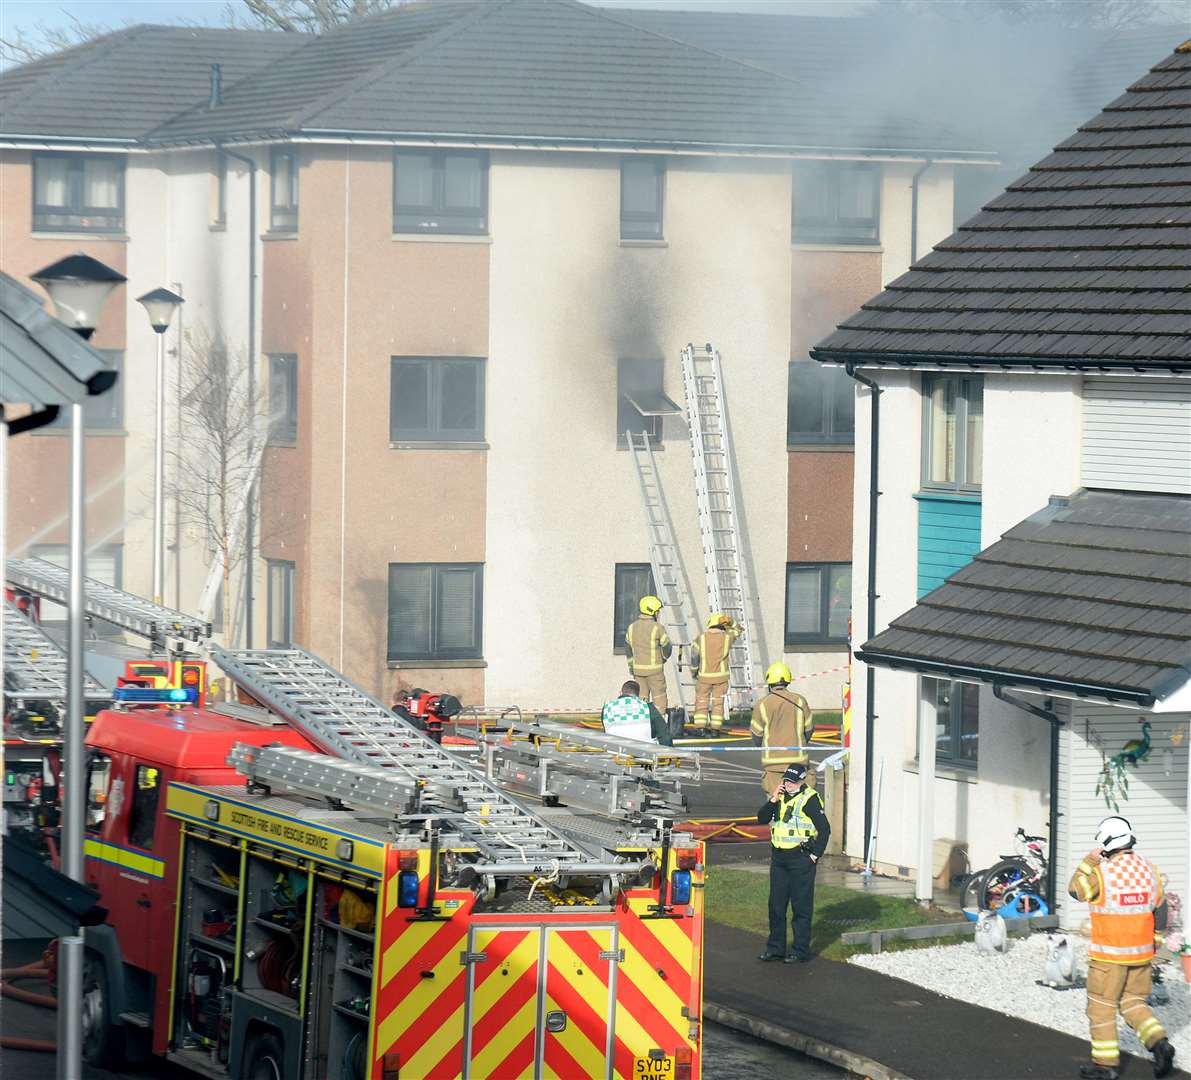 Police and fire service attend a property fire. Picture: Gary Anthony